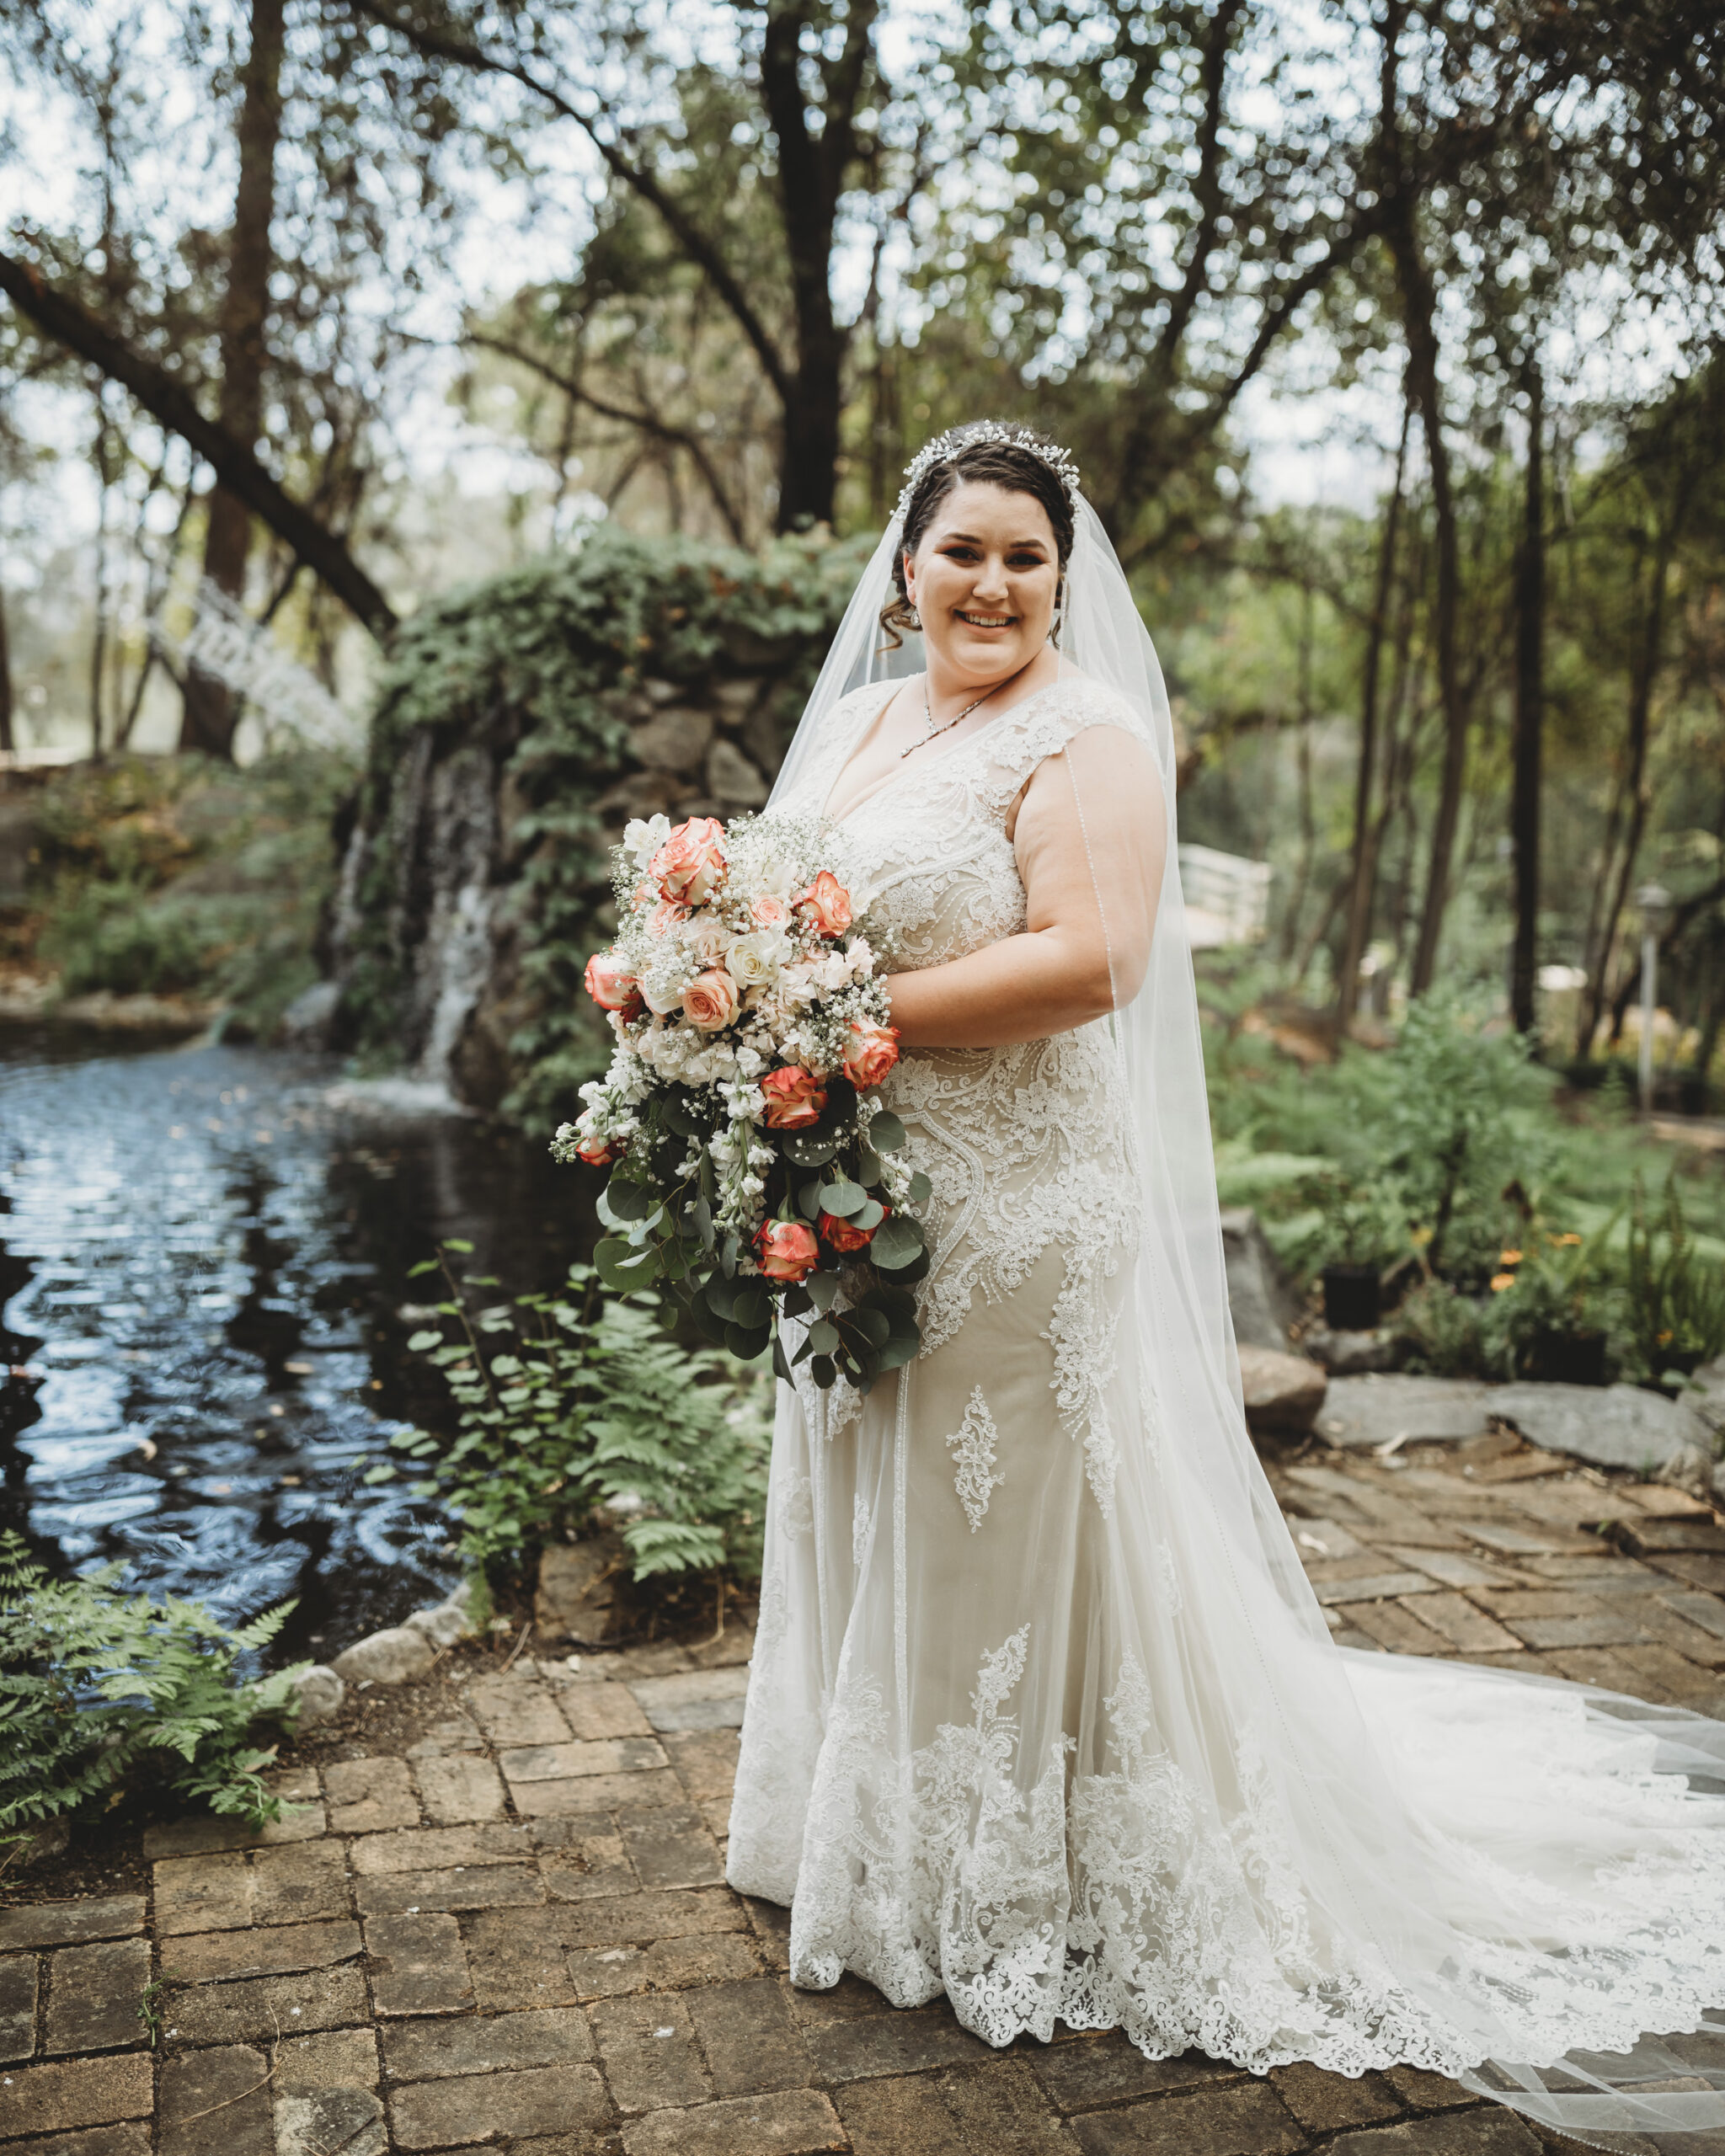 Beautiful plus size bride on wedding day smiling with lace dress in nature by waterfall in long beach califorfnia